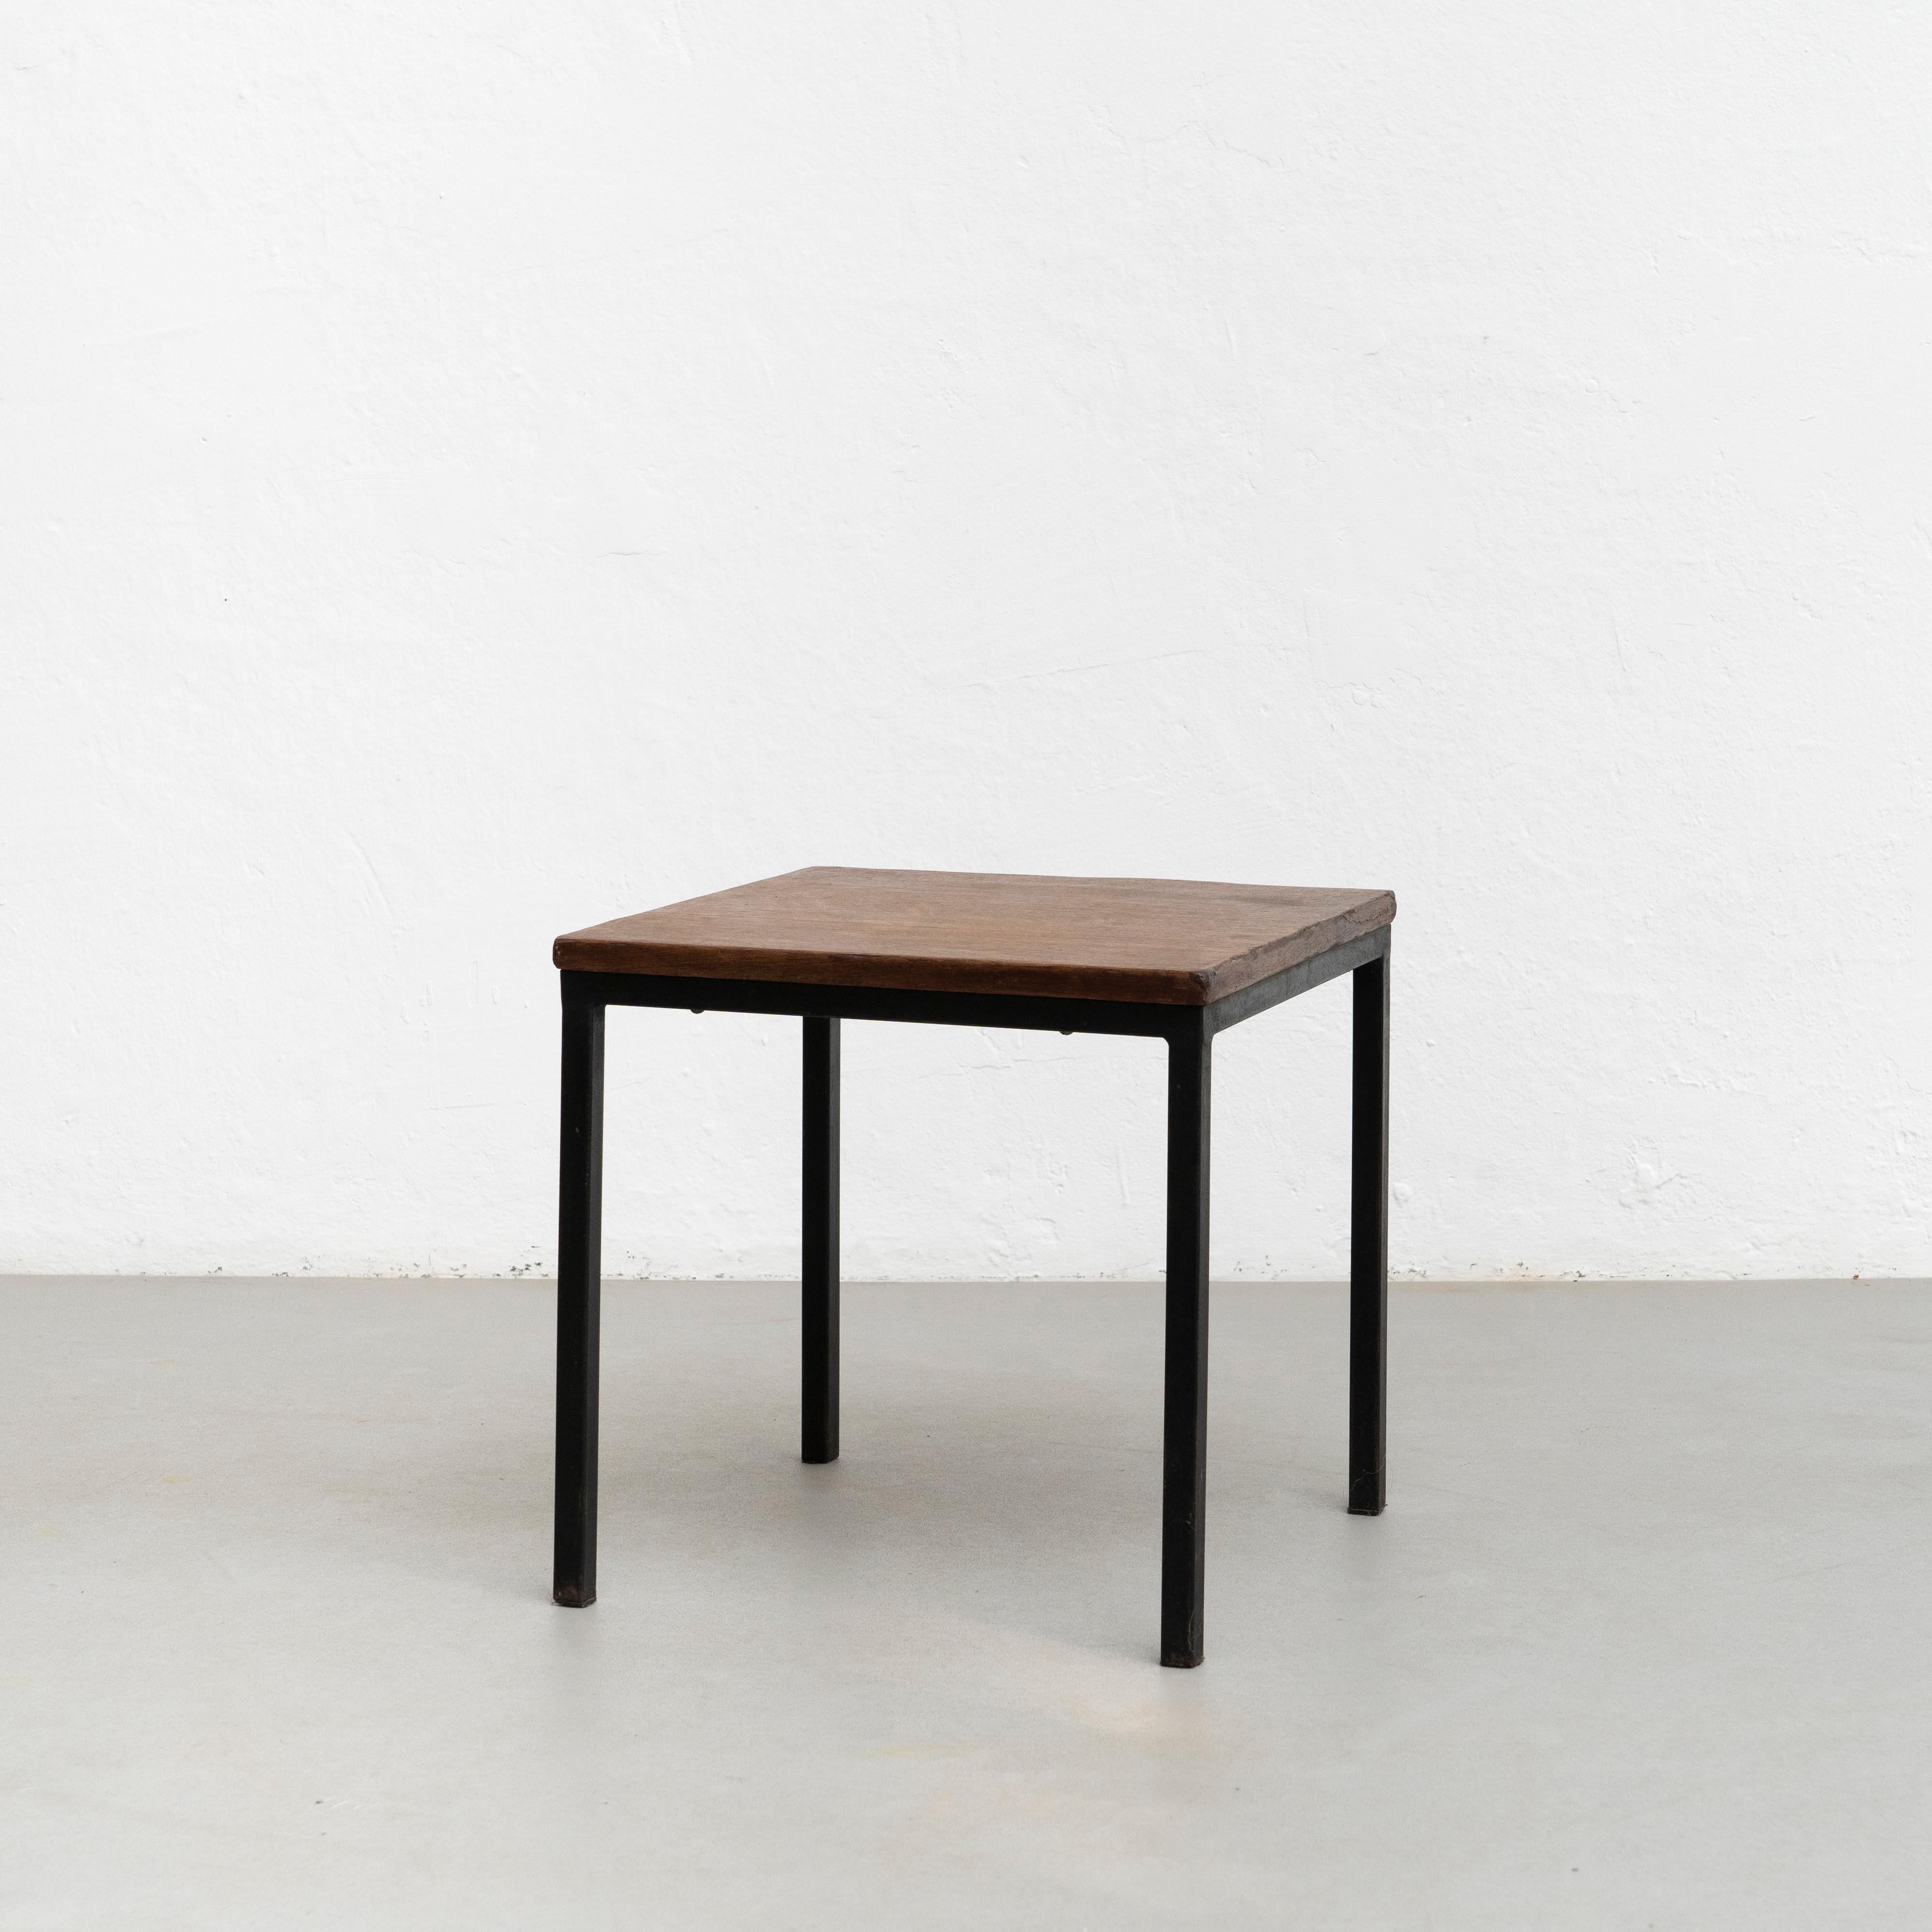 Mid-Century Modern Charlotte Perriand Metal, Wood LowTable for Cansado, circa 1950